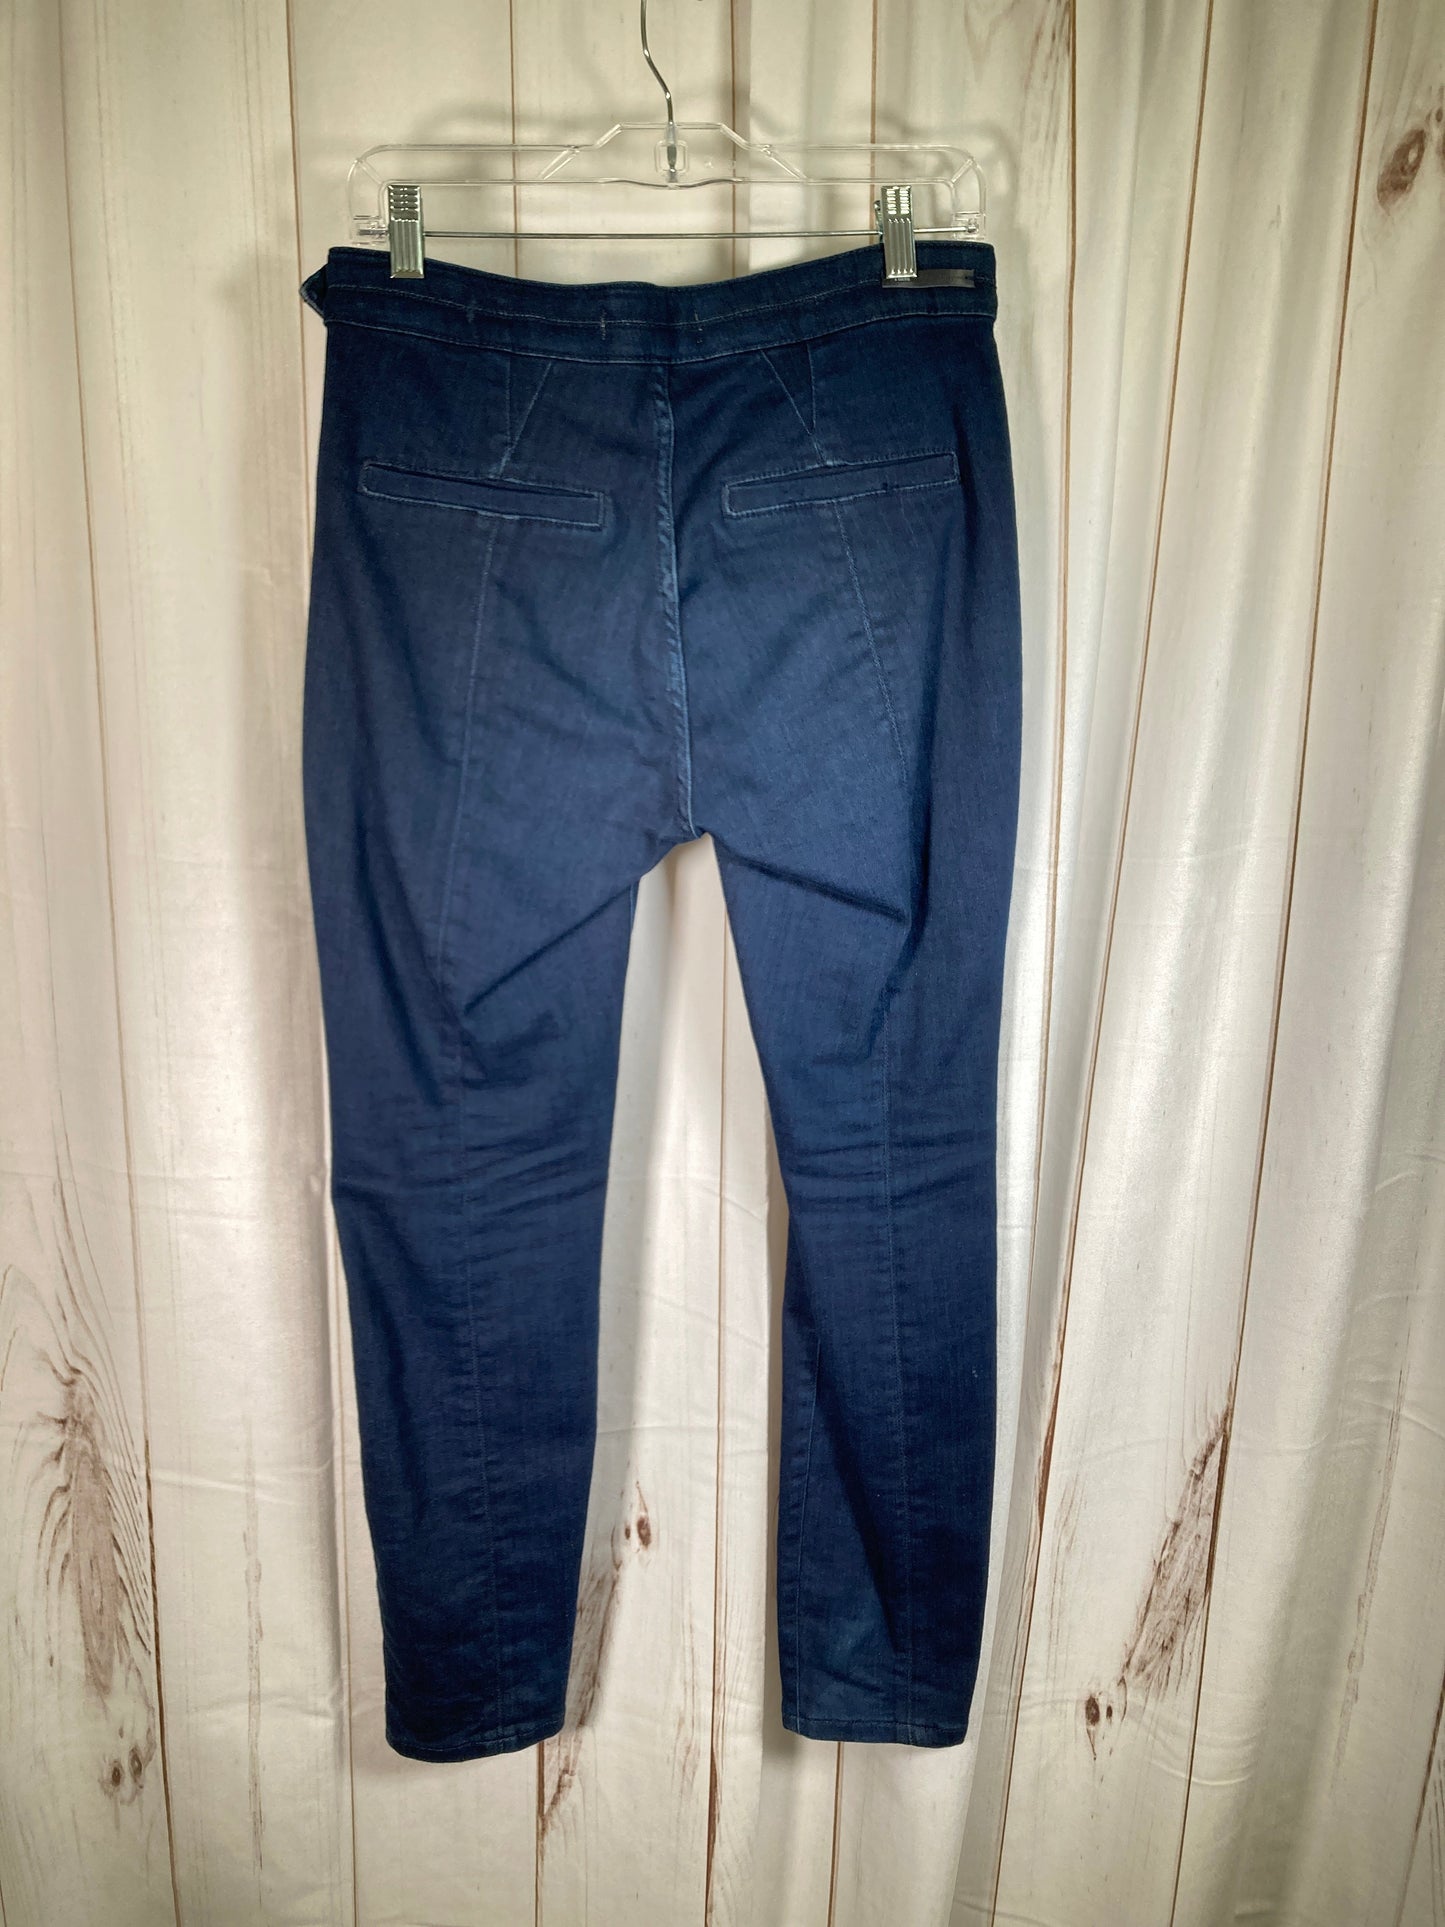 Jeans Skinny By Pilcro  Size: 6